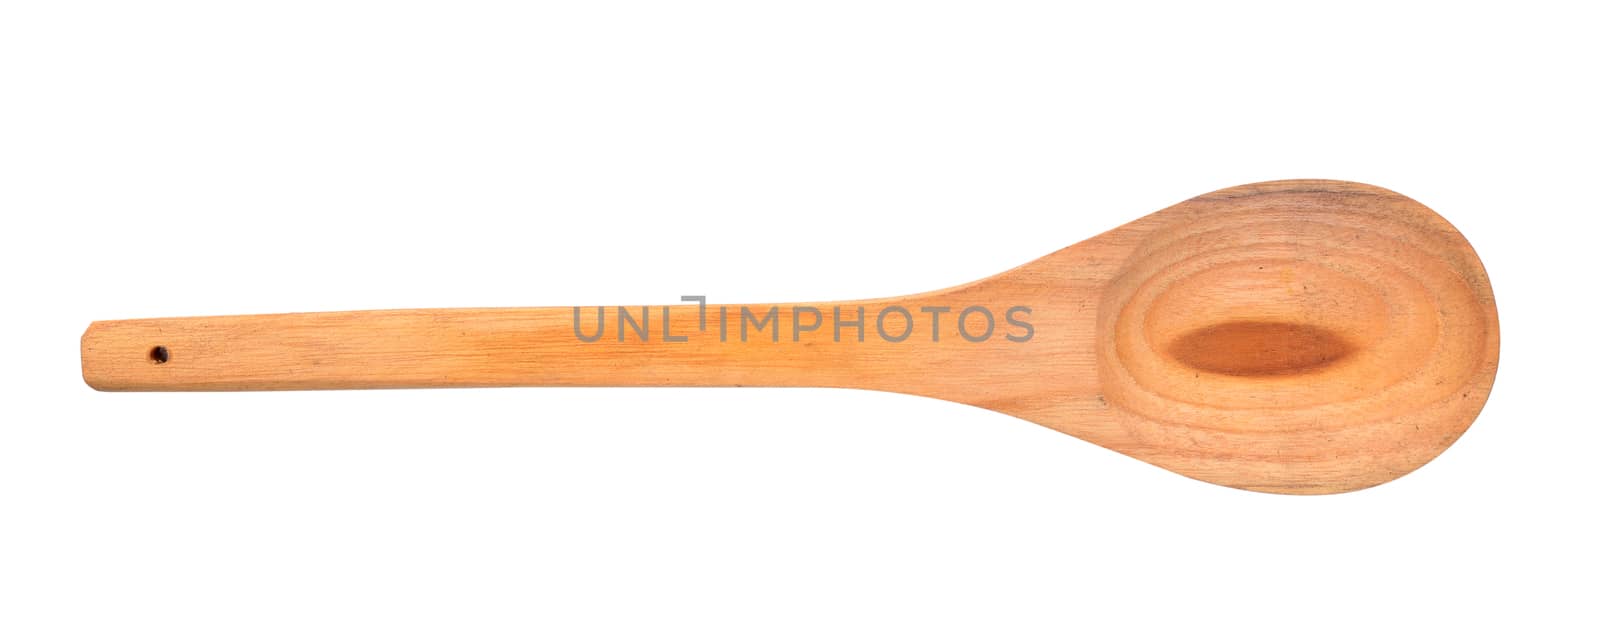  Wooden Spoon isolated on white background by sommai